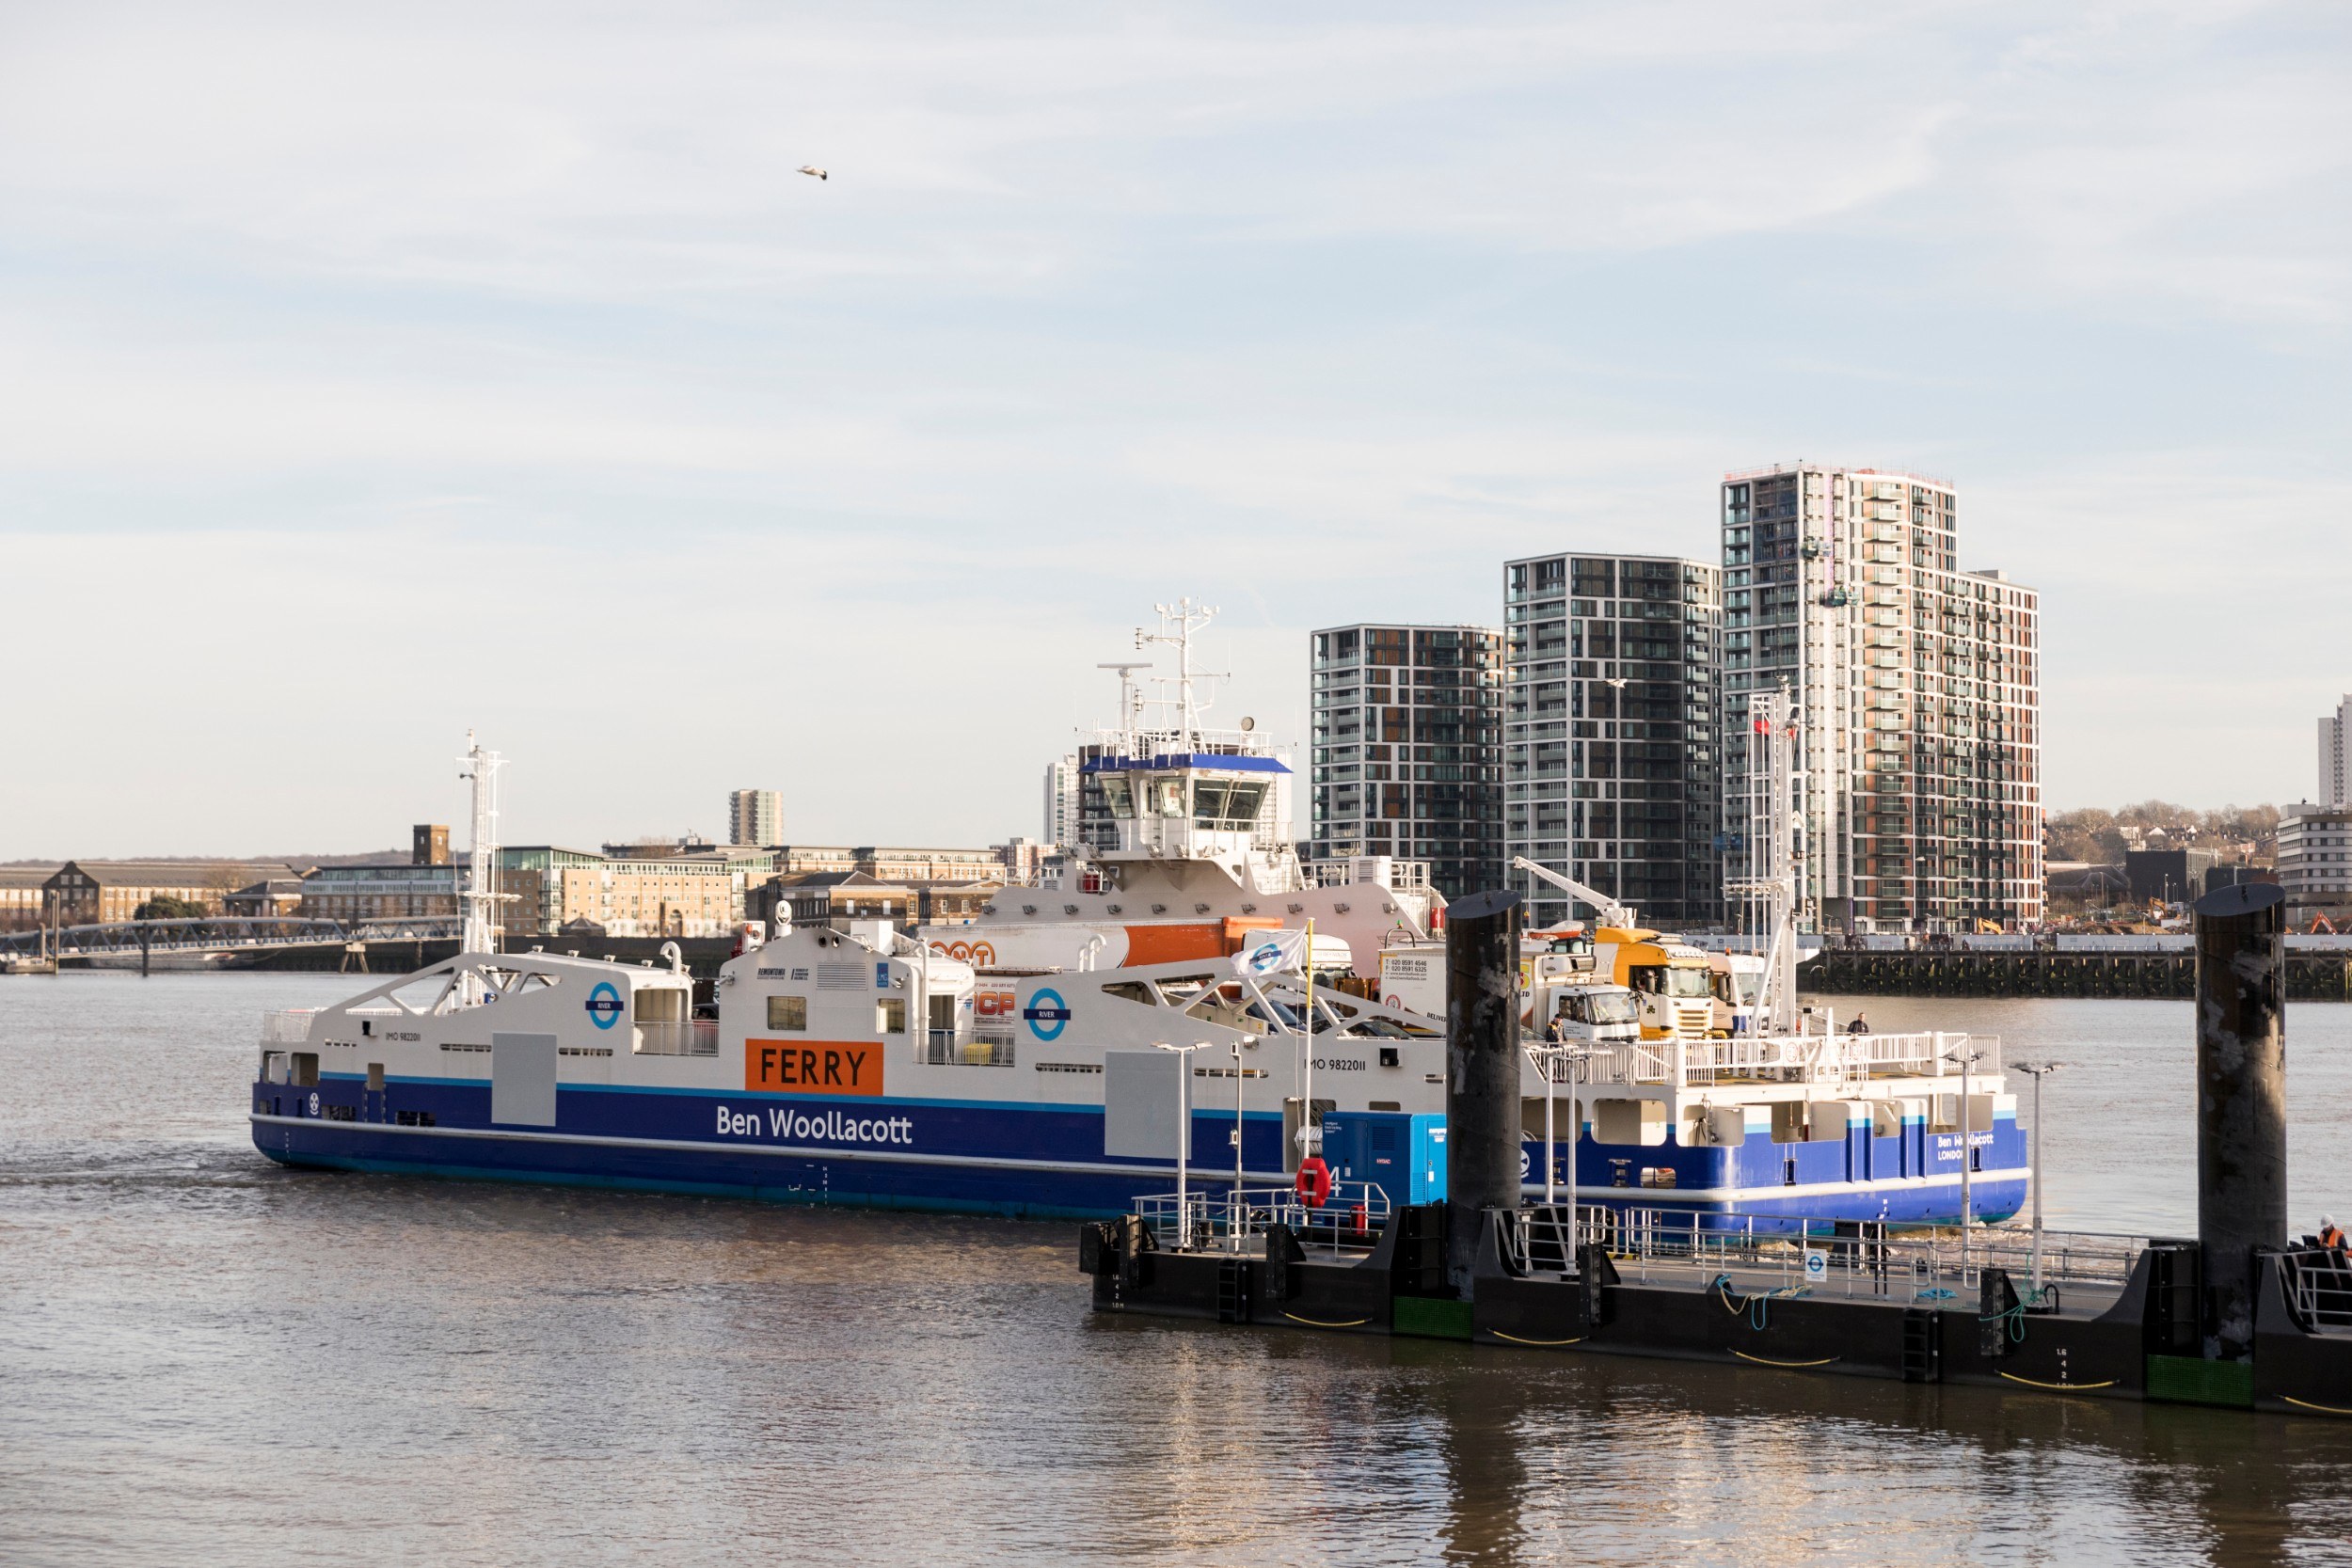 The new Woolwich Ferry model arriving at a dock